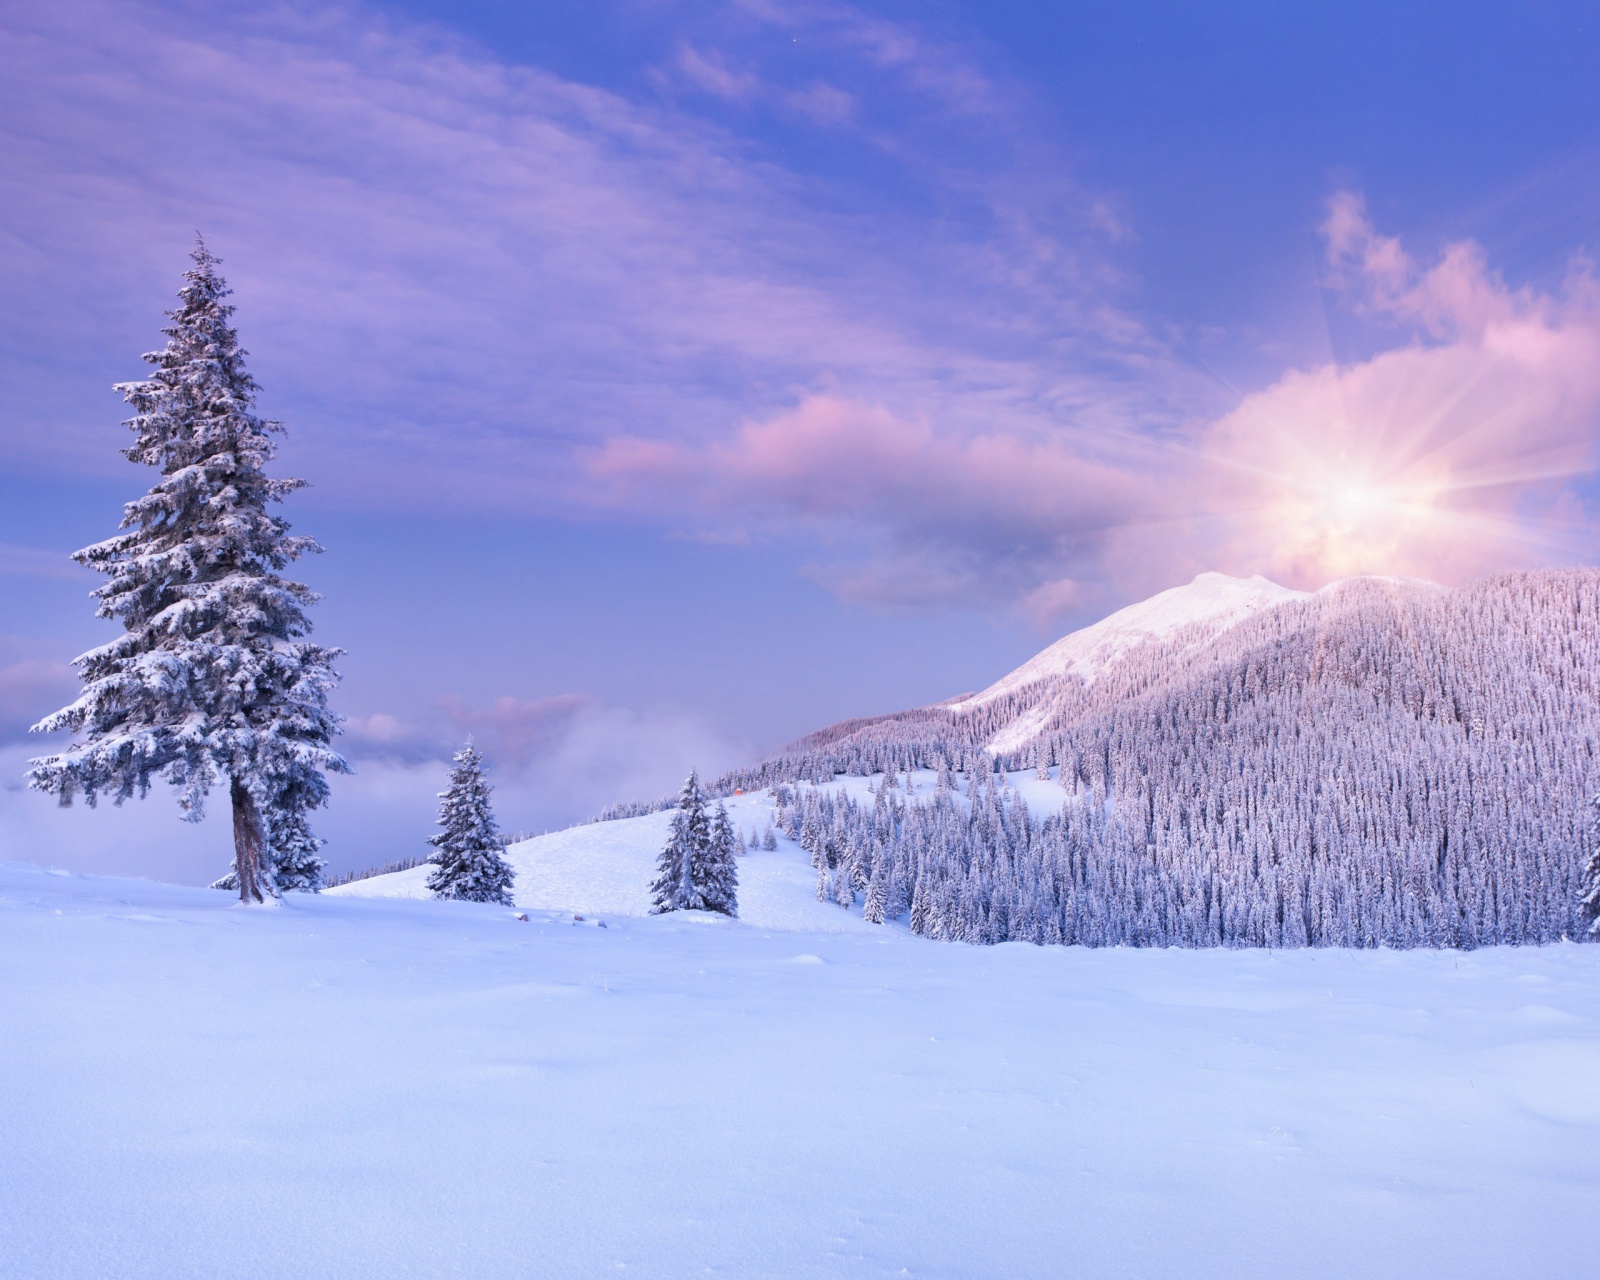 Mountain and Winter Landscape wallpaper 1600x1280